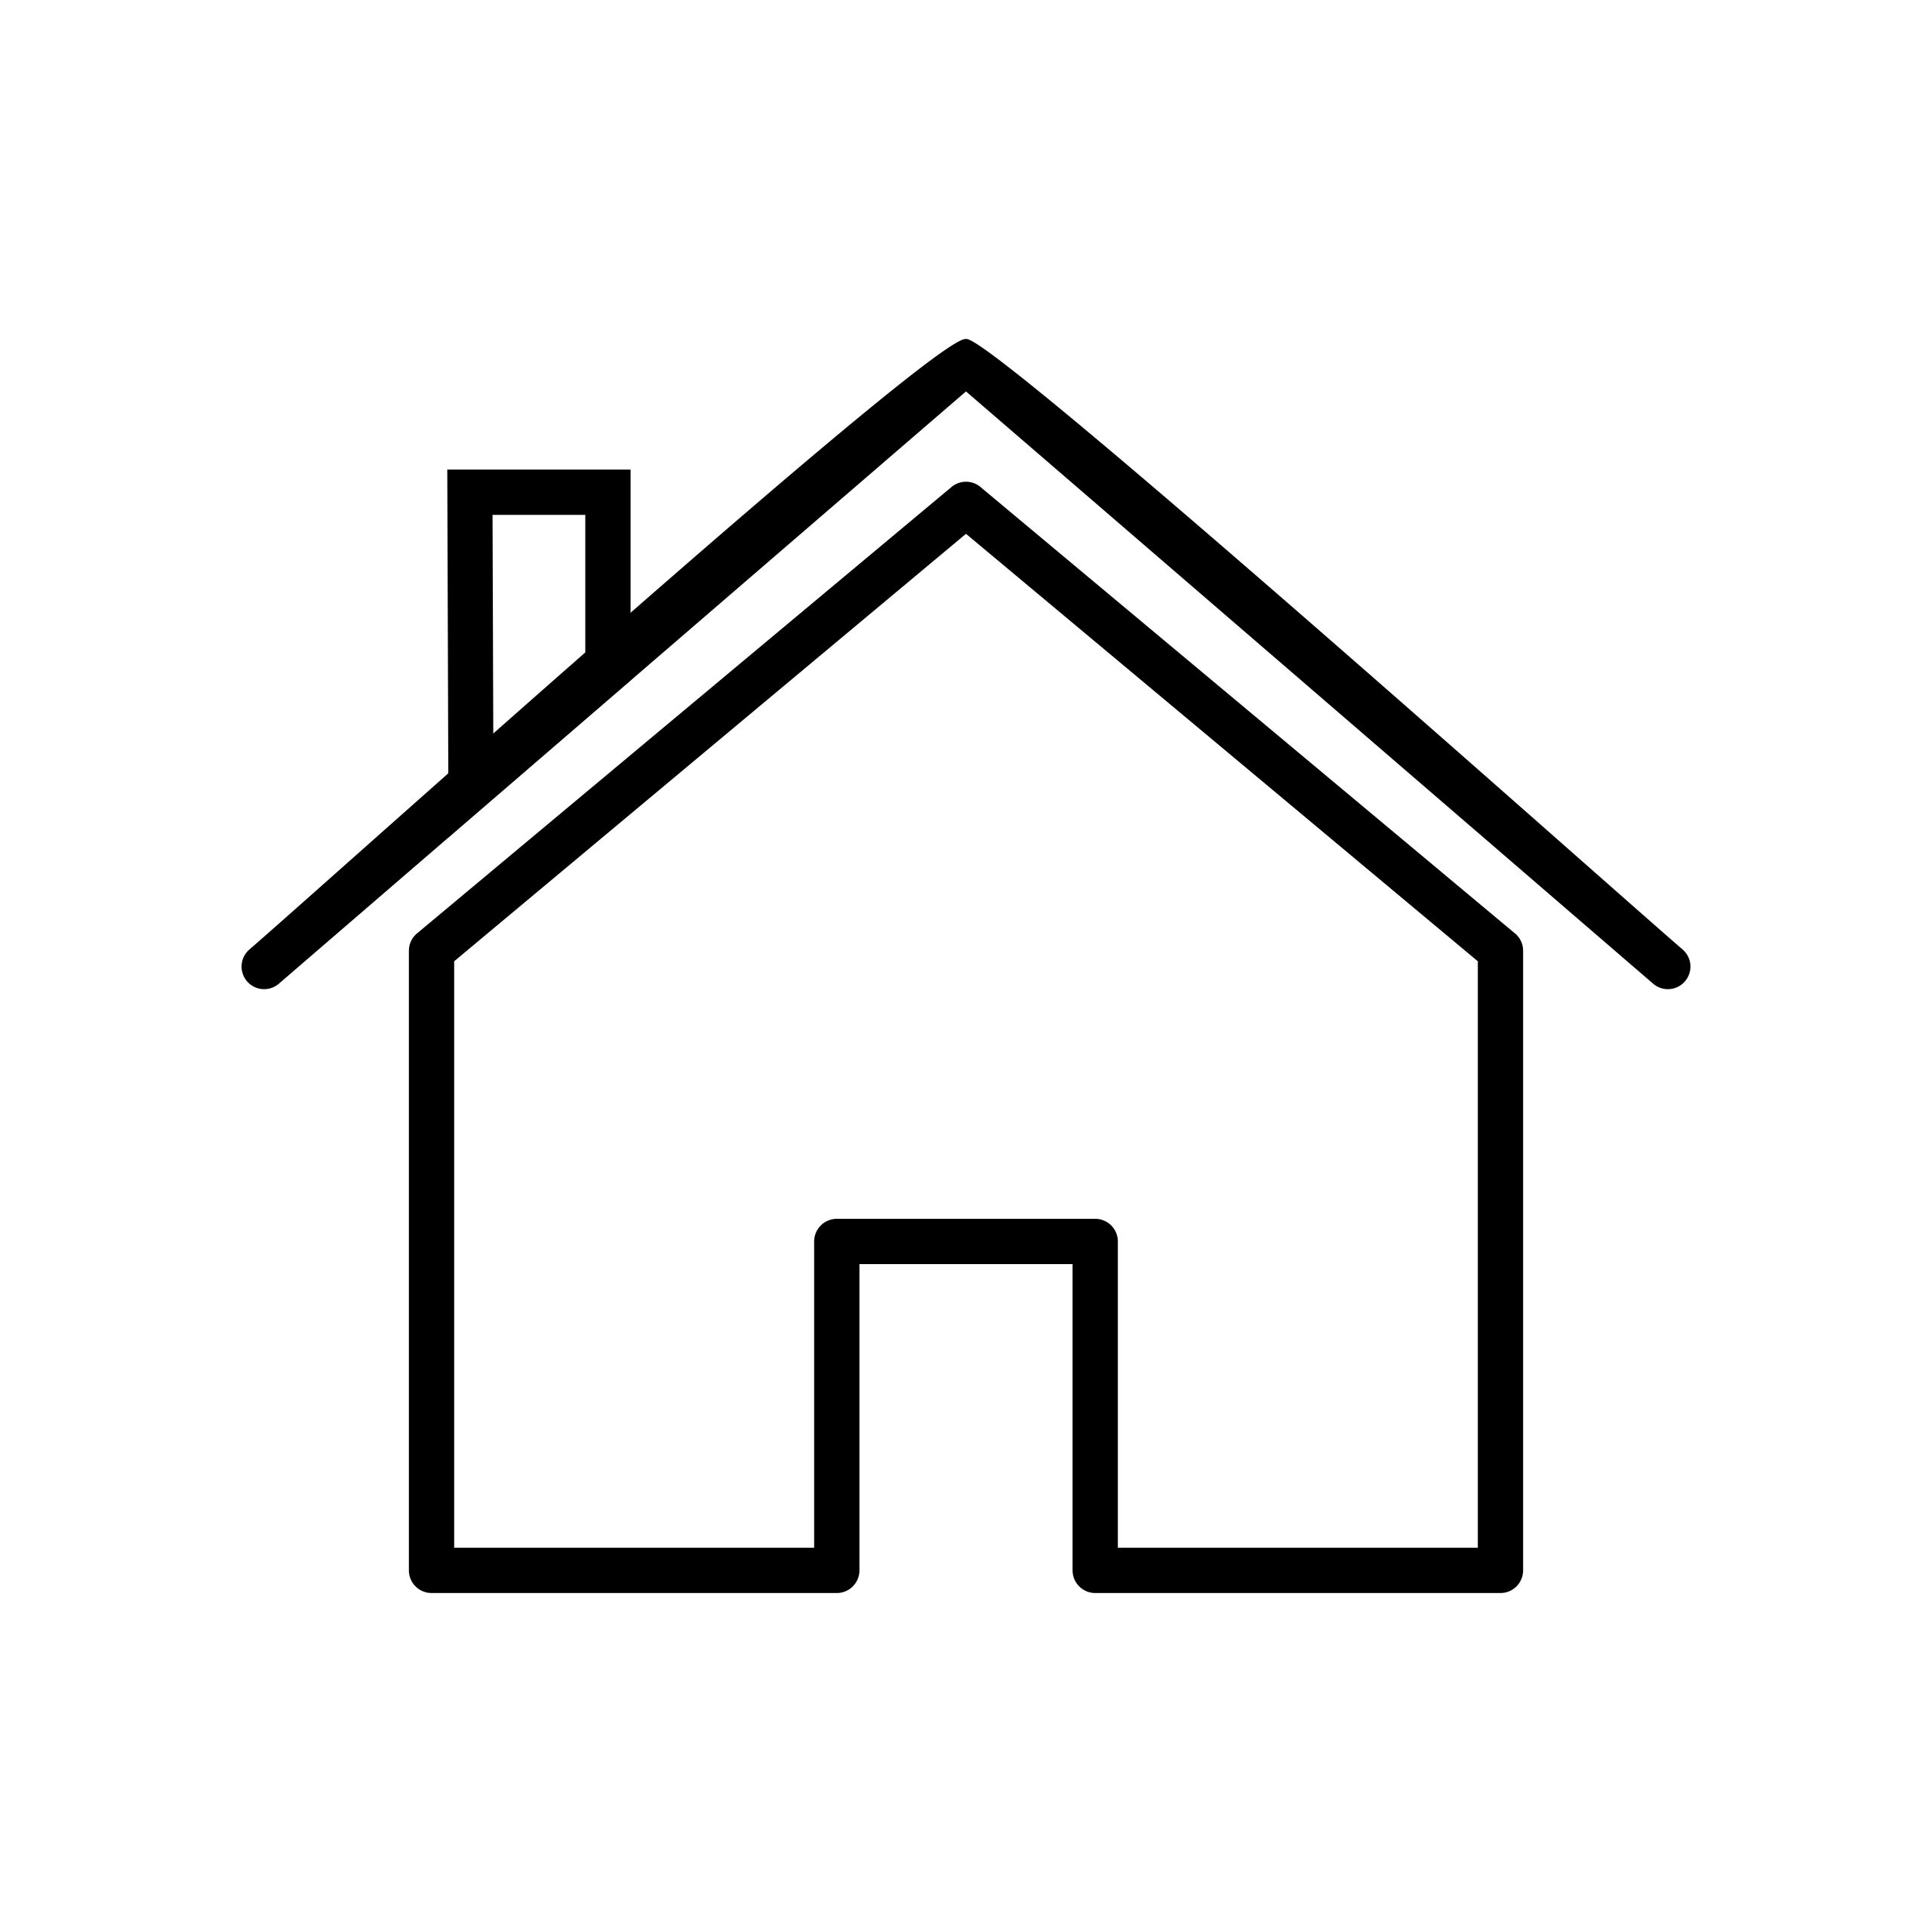 House Sign Icon Vector Illustration For Personal And Commercial Use...
Clean Look Trendy Icon...